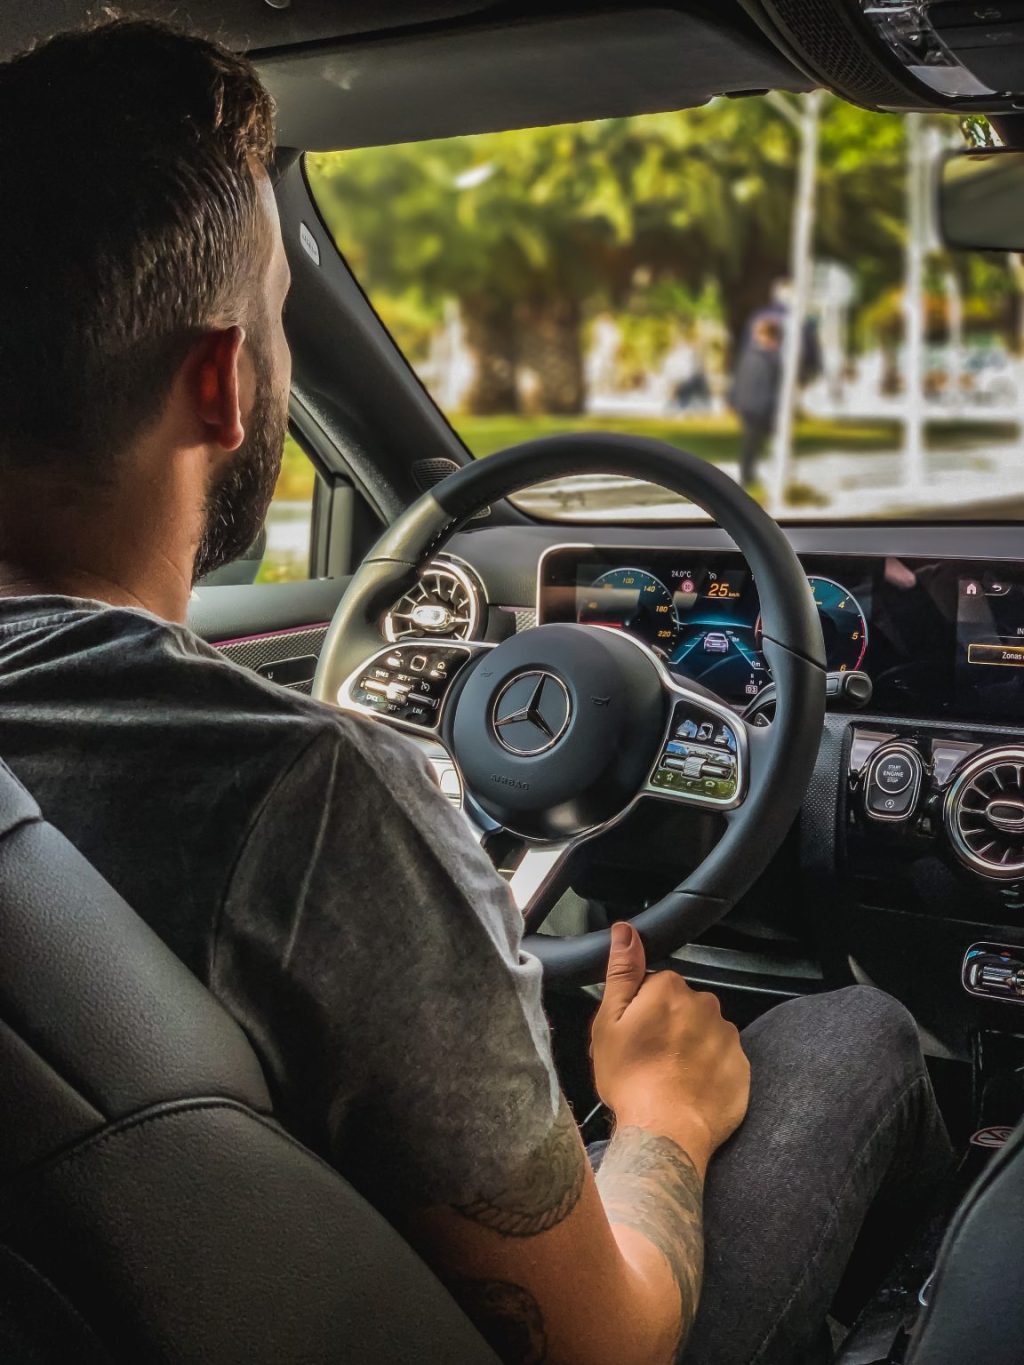 Behind The Wheel: The Responsibilities Of A Personal Driver